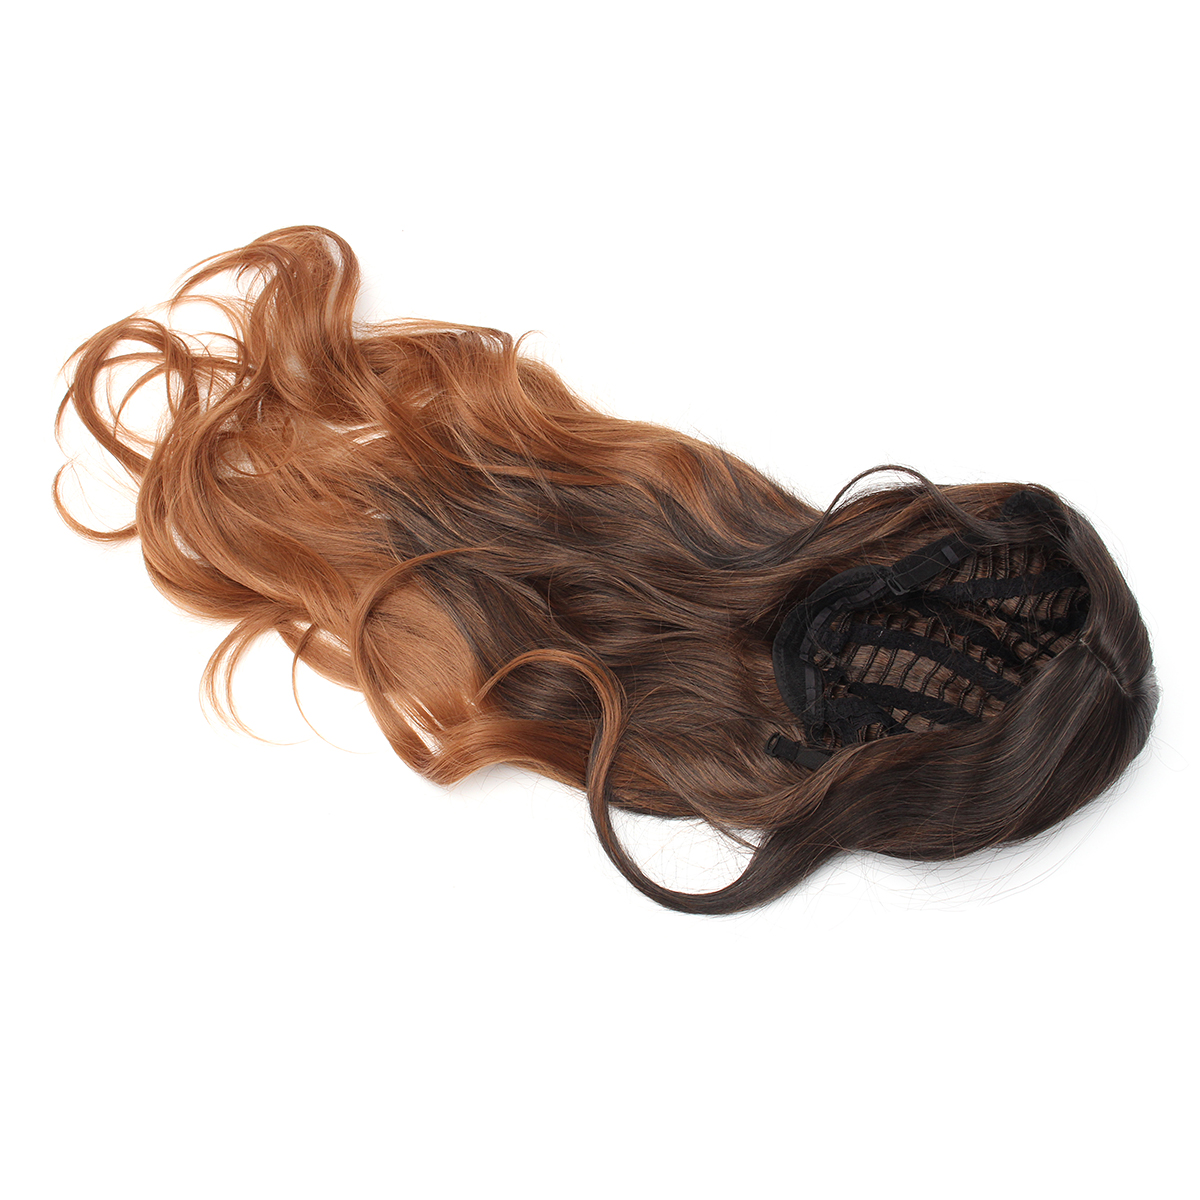 Womens-Long-Wavy-Curly-Hair-Synthetic-Wig-Black-Brown-Ombre-Cosplay-Party-Wig-1354613-4